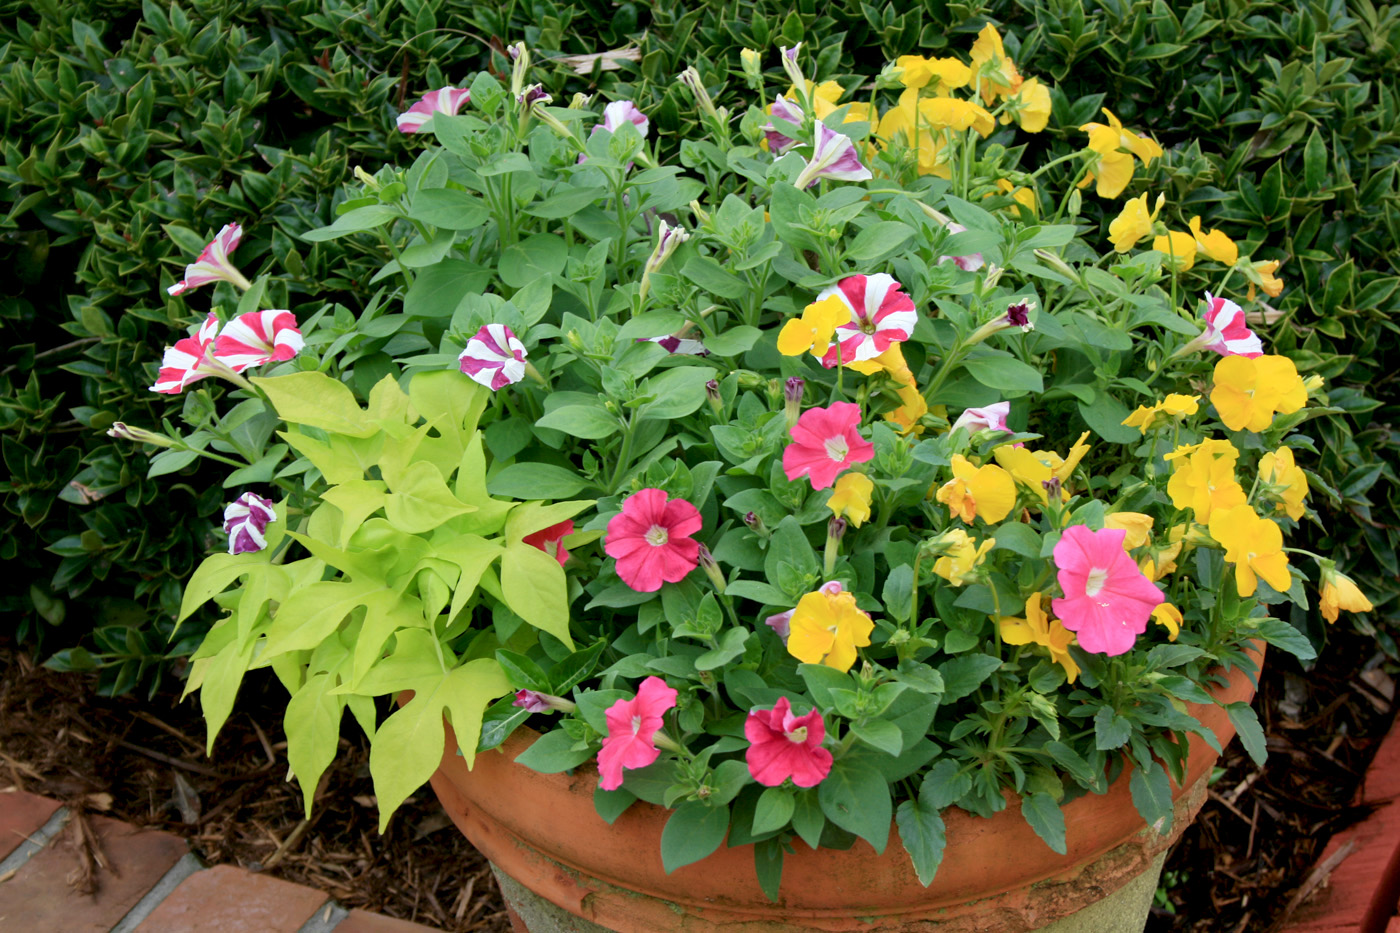 A container pot full of colorful ornamentals.